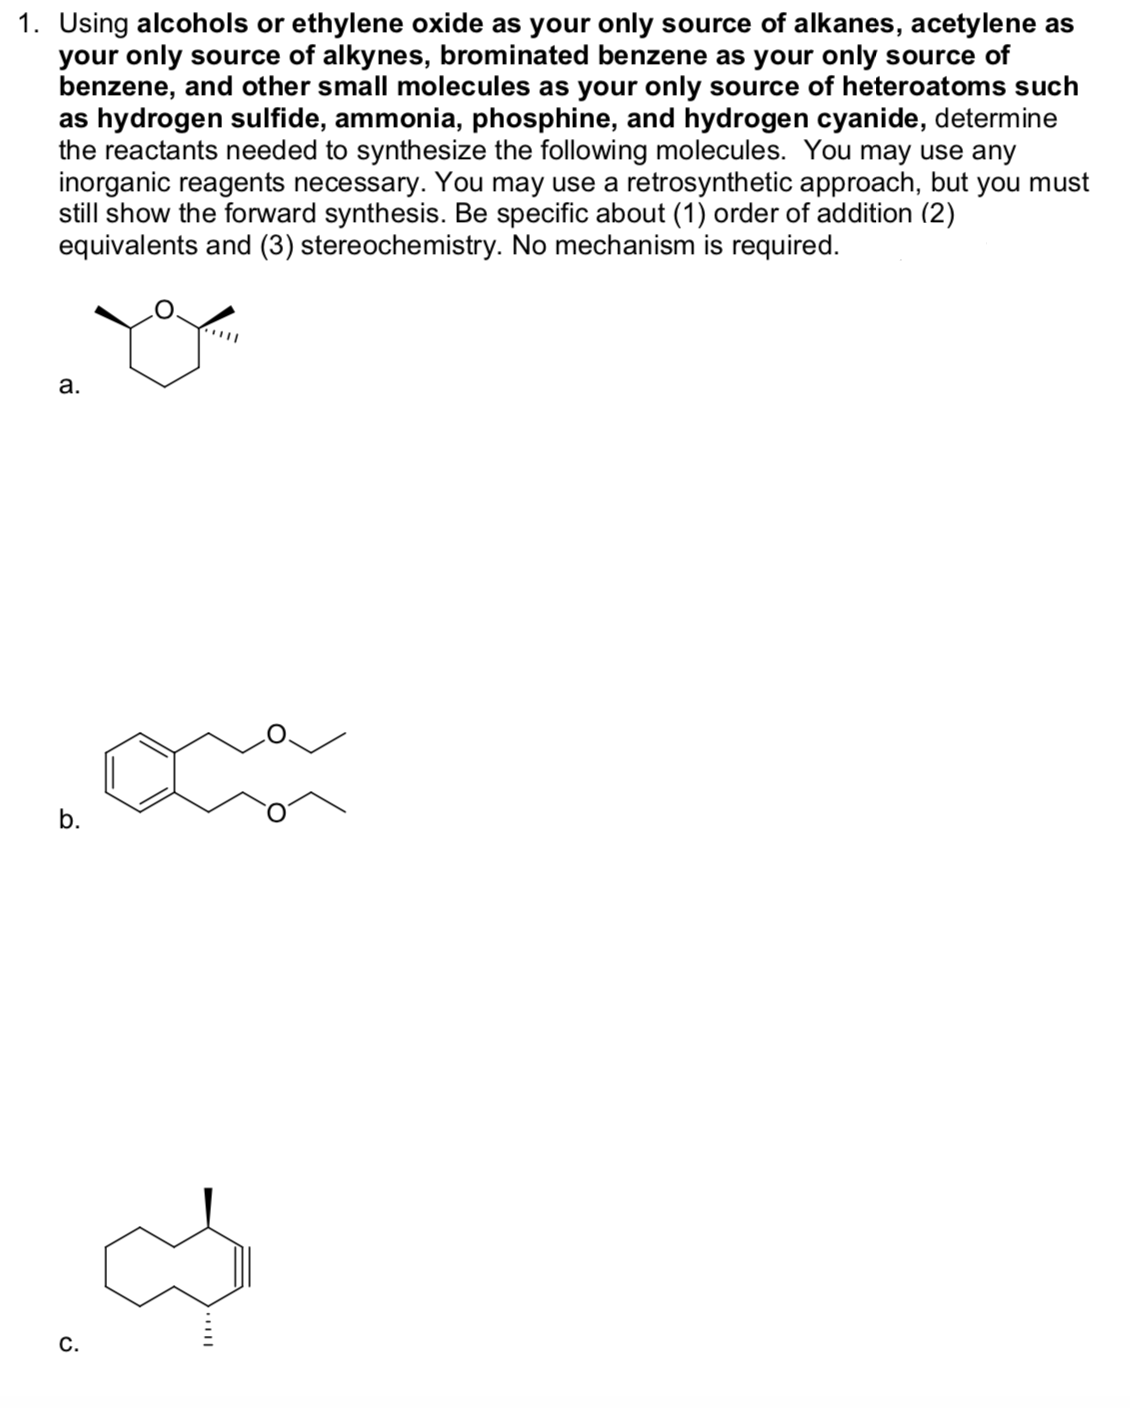 1. Using alcohols or ethylene oxide as your only source of alkanes, acetylene as
your only source of alkynes, brominated benzene as your only source of
benzene, and other small molecules as your only source of heteroatoms such
as hydrogen sulfide, ammonia, phosphine, and hydrogen cyanide, determine
the reactants needed to synthesize the following molecules. You may use any
inorganic reagents necessary. You may use a retrosynthetic approach, but you must
still show the forward synthesis. Be specific about (1) order of addition (2)
equivalents and (3) stereochemistry. No mechanism is required.
а.
b.
С.
